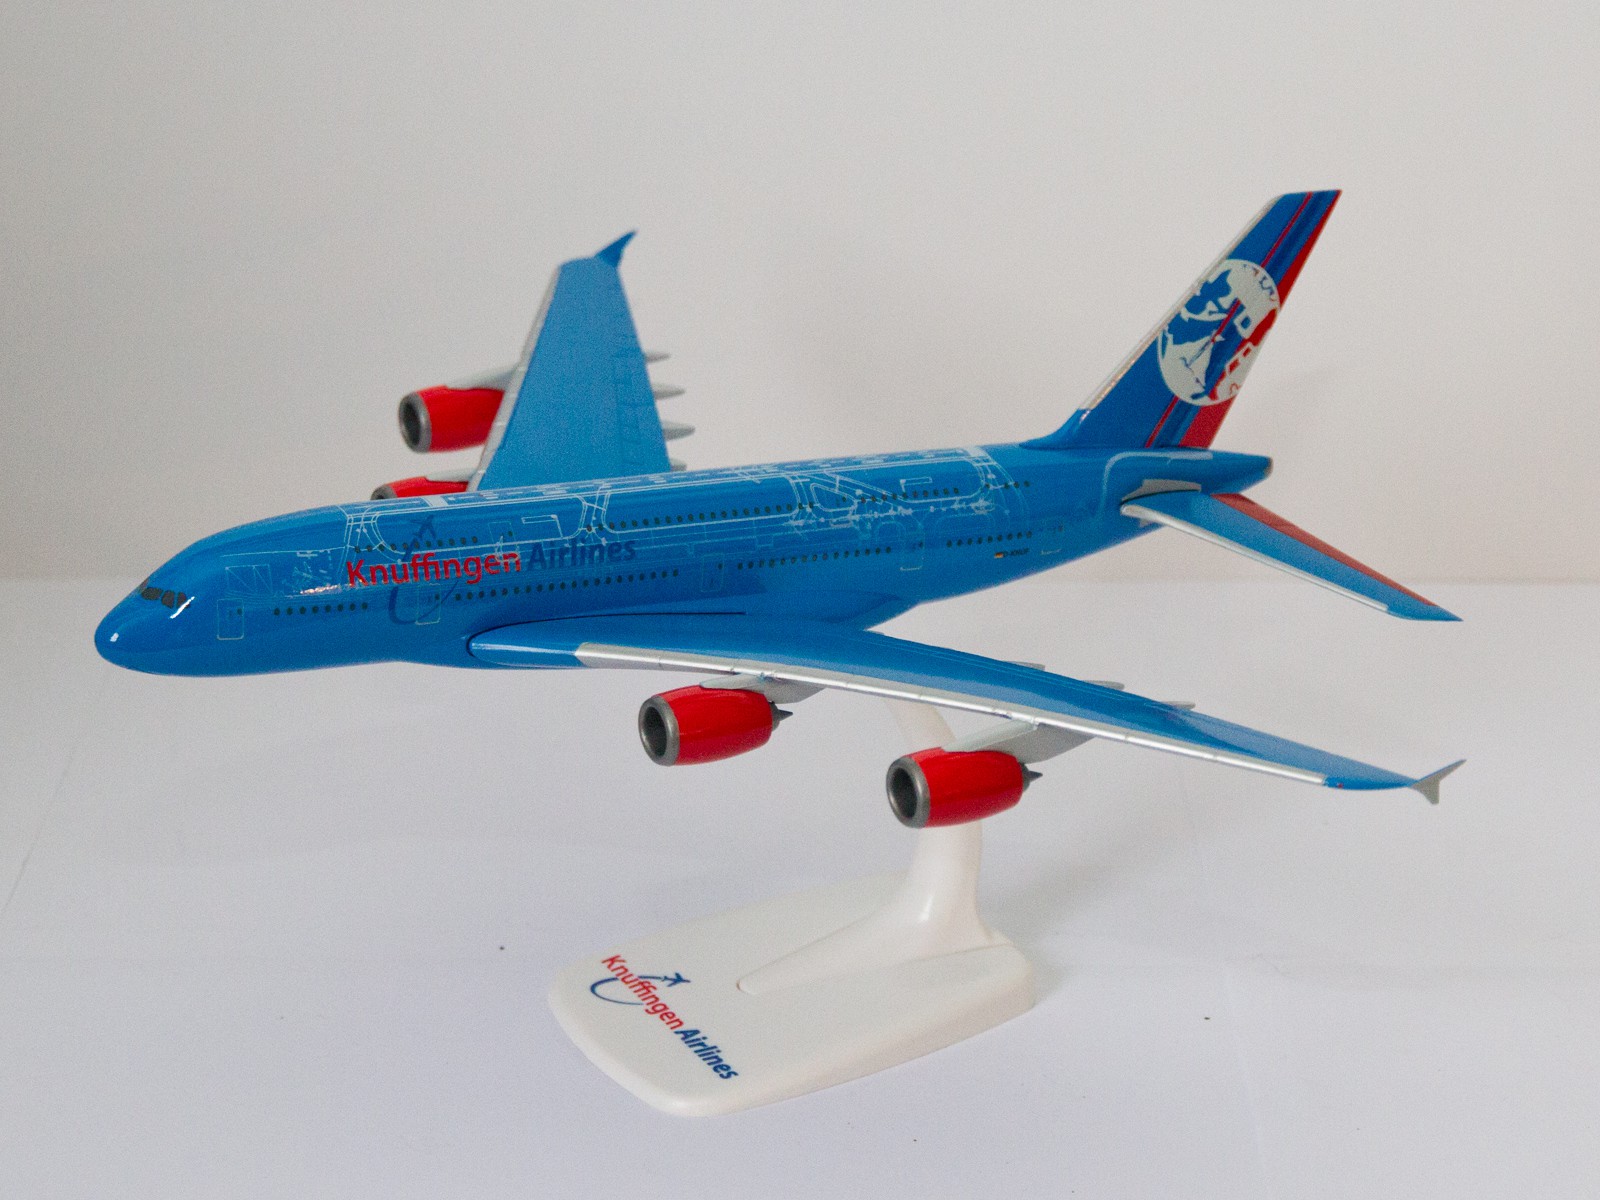 Herpa 609326 A 380 "Knuffingen Airlines" 1:250